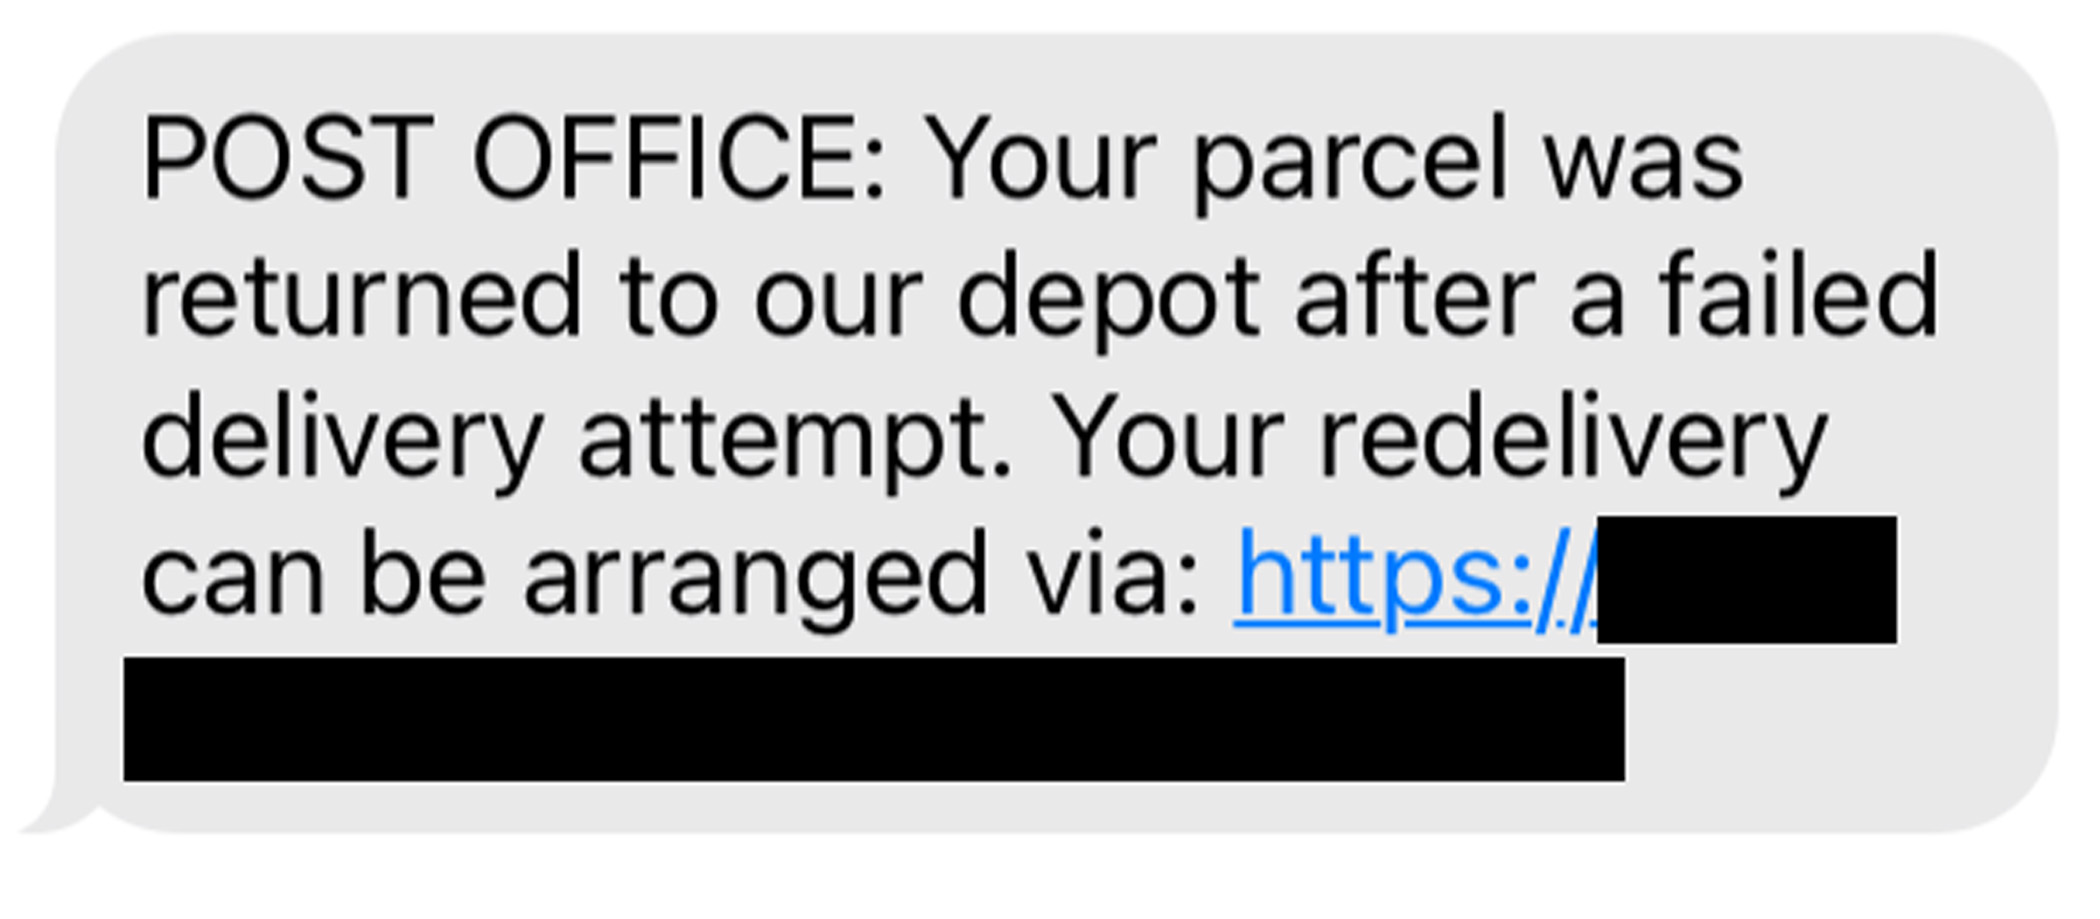 The Post Office scam text reported by Trading Standards (Trading Standards/PA)